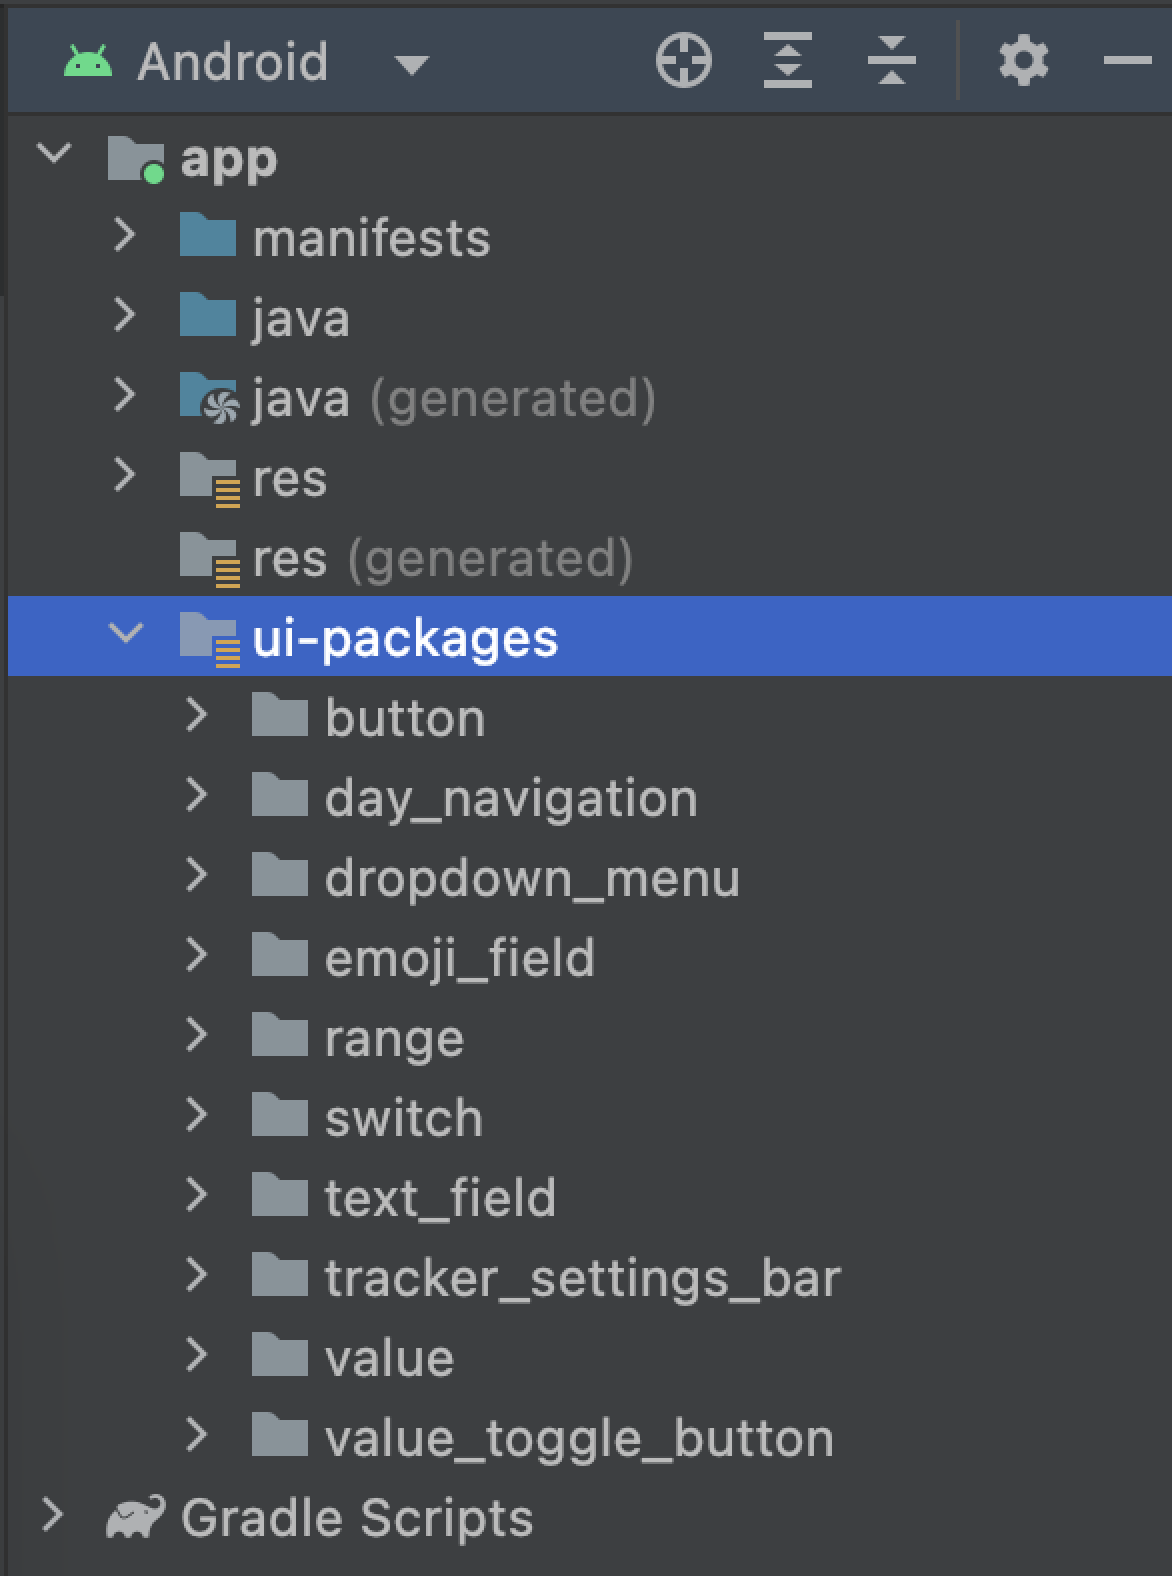 A pasta ui-packages